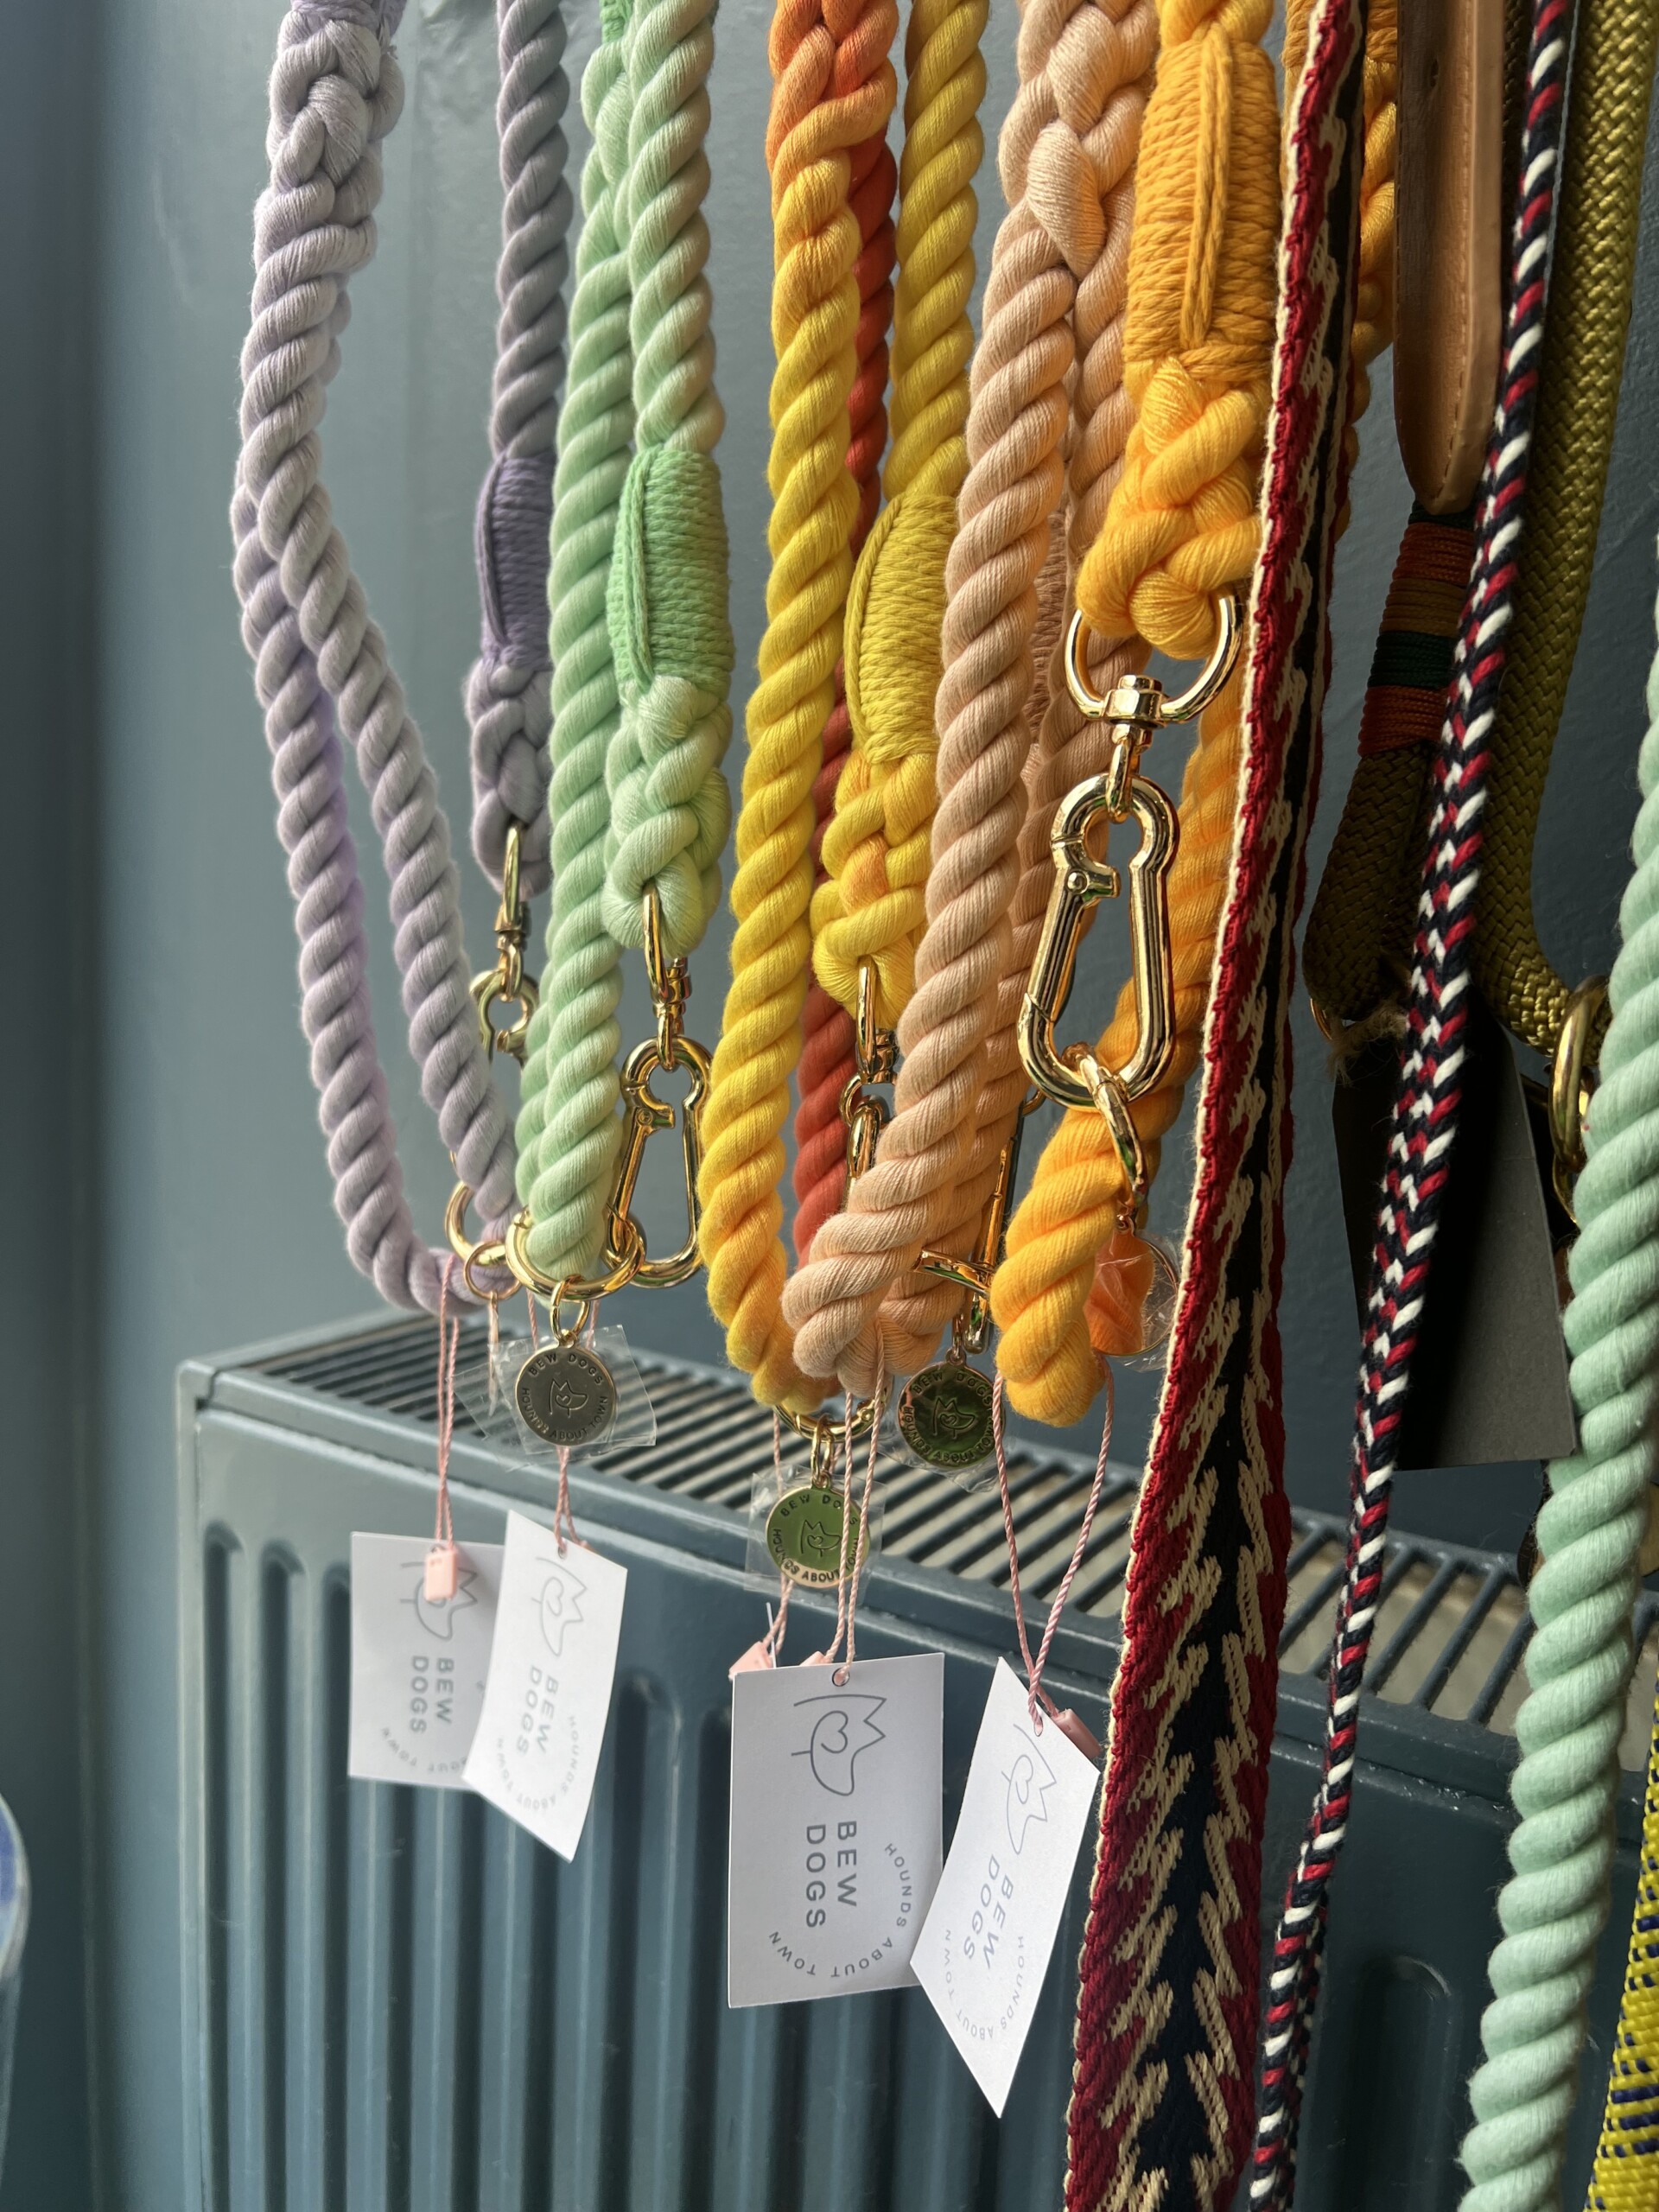 Pastel rope dog leads in lilac, mint green, peach and honey orange with bew dogs tags, hanging against a modern dark blue painted wall. 